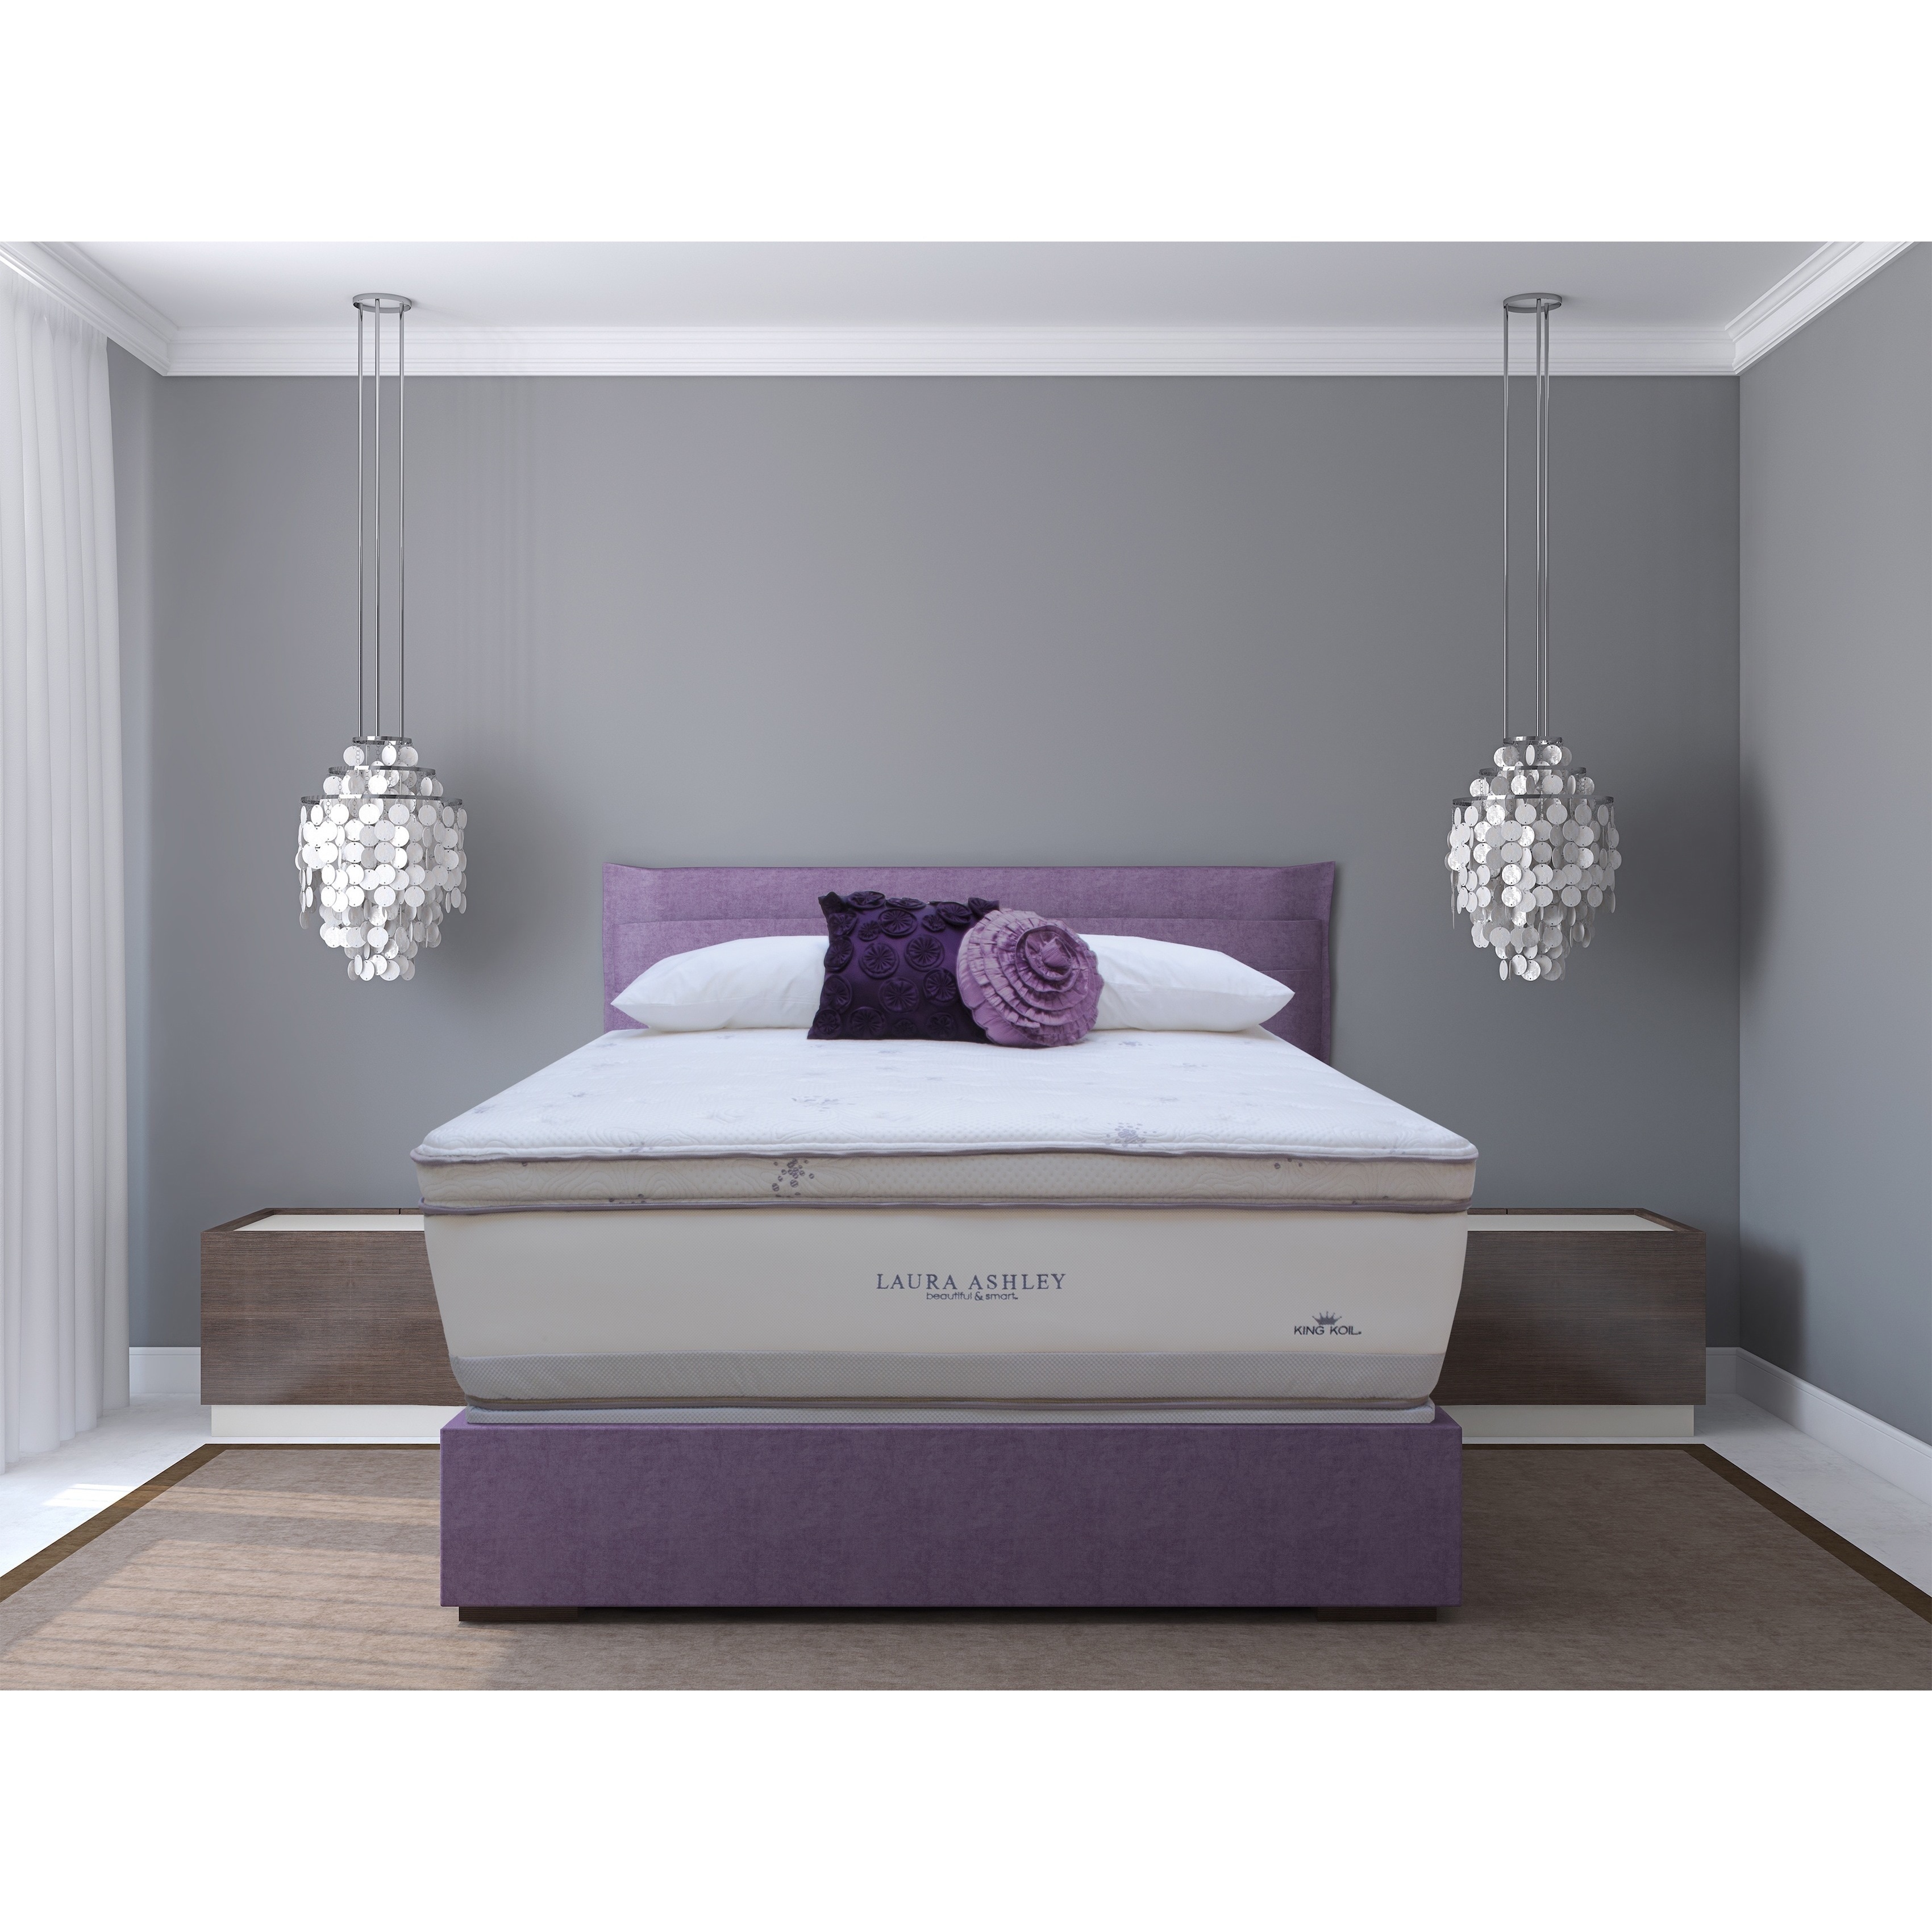 Laura Ashley Laura Ashley Lavender Euro Pillowtop Super Size Twin size Mattress And Foundation Sets White Size Twin